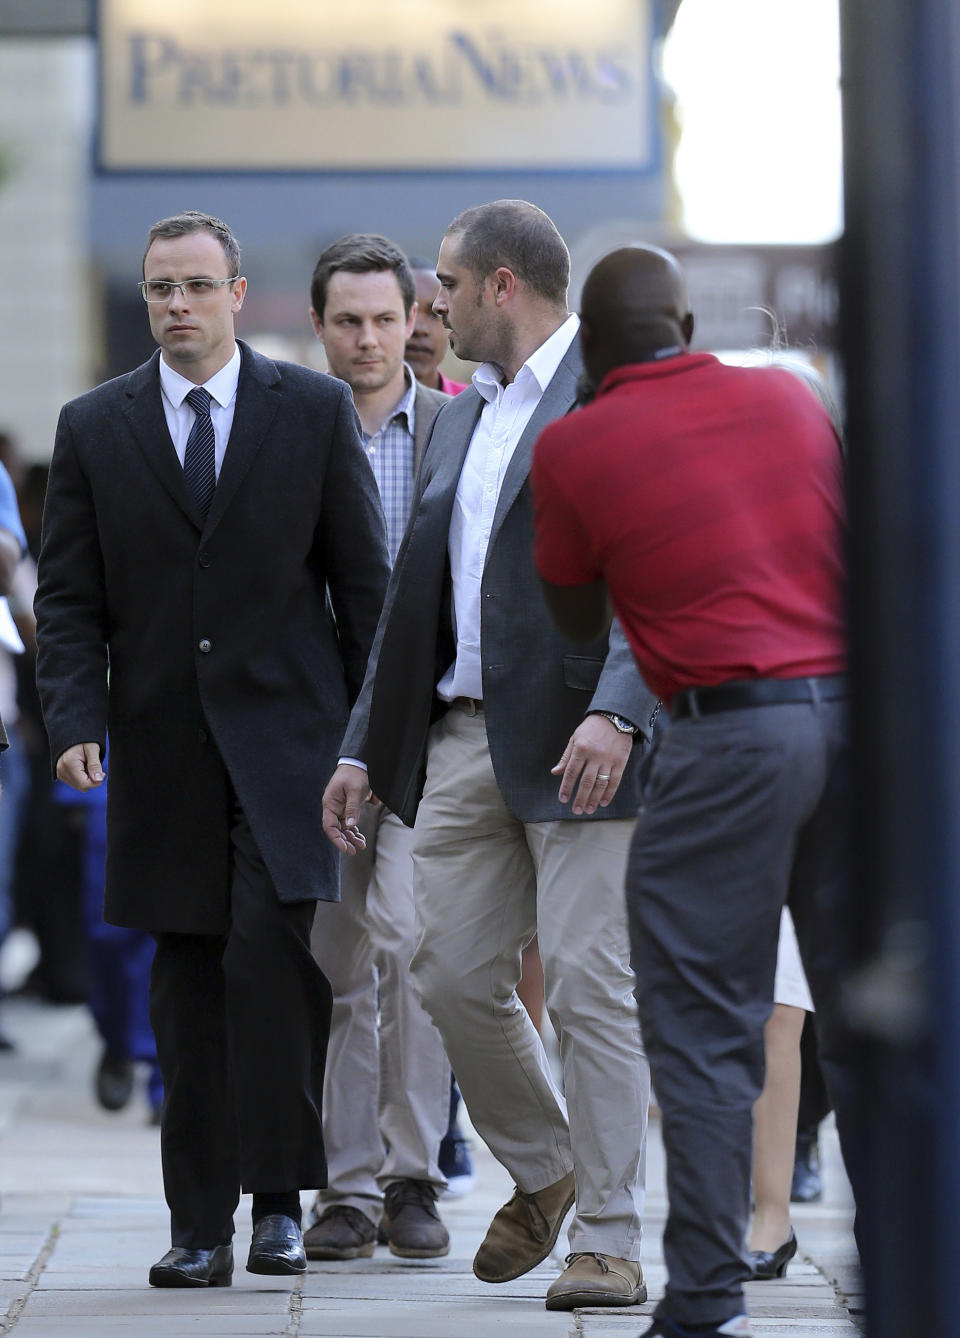 Oscar Pistorius, left, accompanied by his relatives, walks towards the high court in Pretoria, South Africa, Tuesday, April 8, 2014. Pistorius, who is charged with murder for the shooting death of his girlfriend, Reeva Steenkamp, on Valentines Day in 2013, was testifying for a second day at his murder trial Tuesday, answering questions from his defense lawyer. (AP Photo/Themba Hadebe)